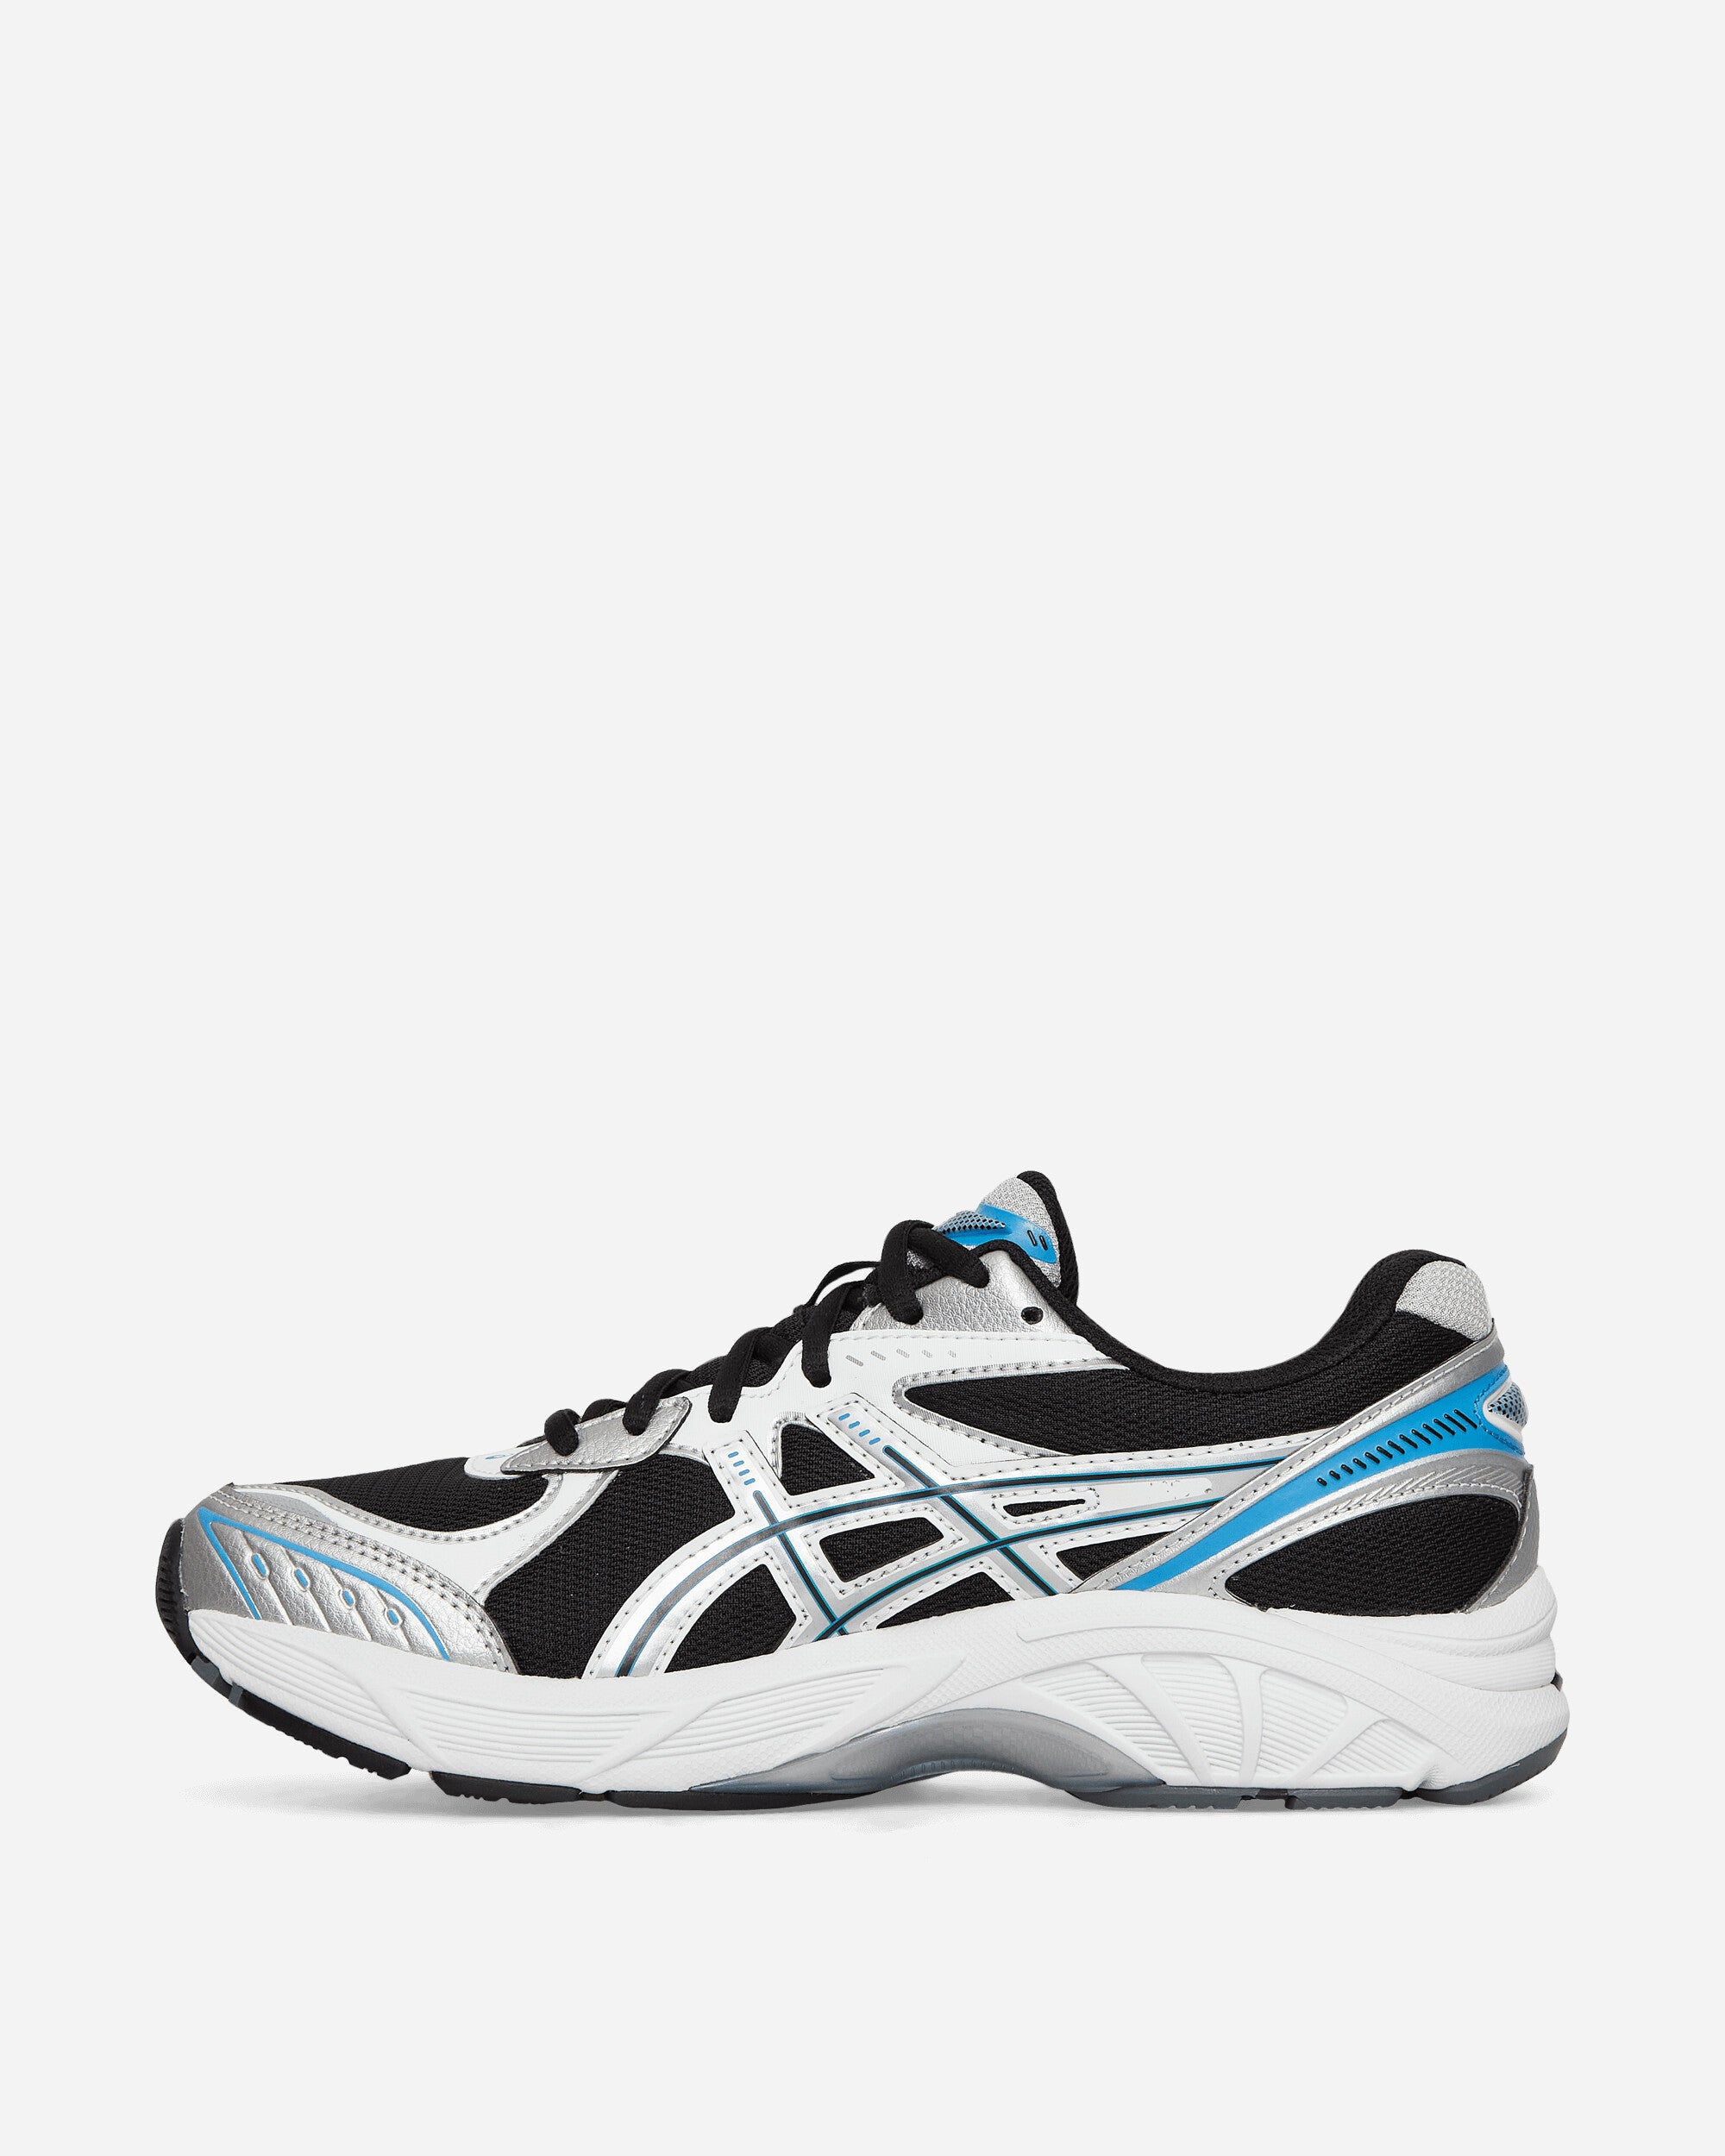 Asics Gt-2160 Black/Pure Silver Sneakers Low 1203A320-004